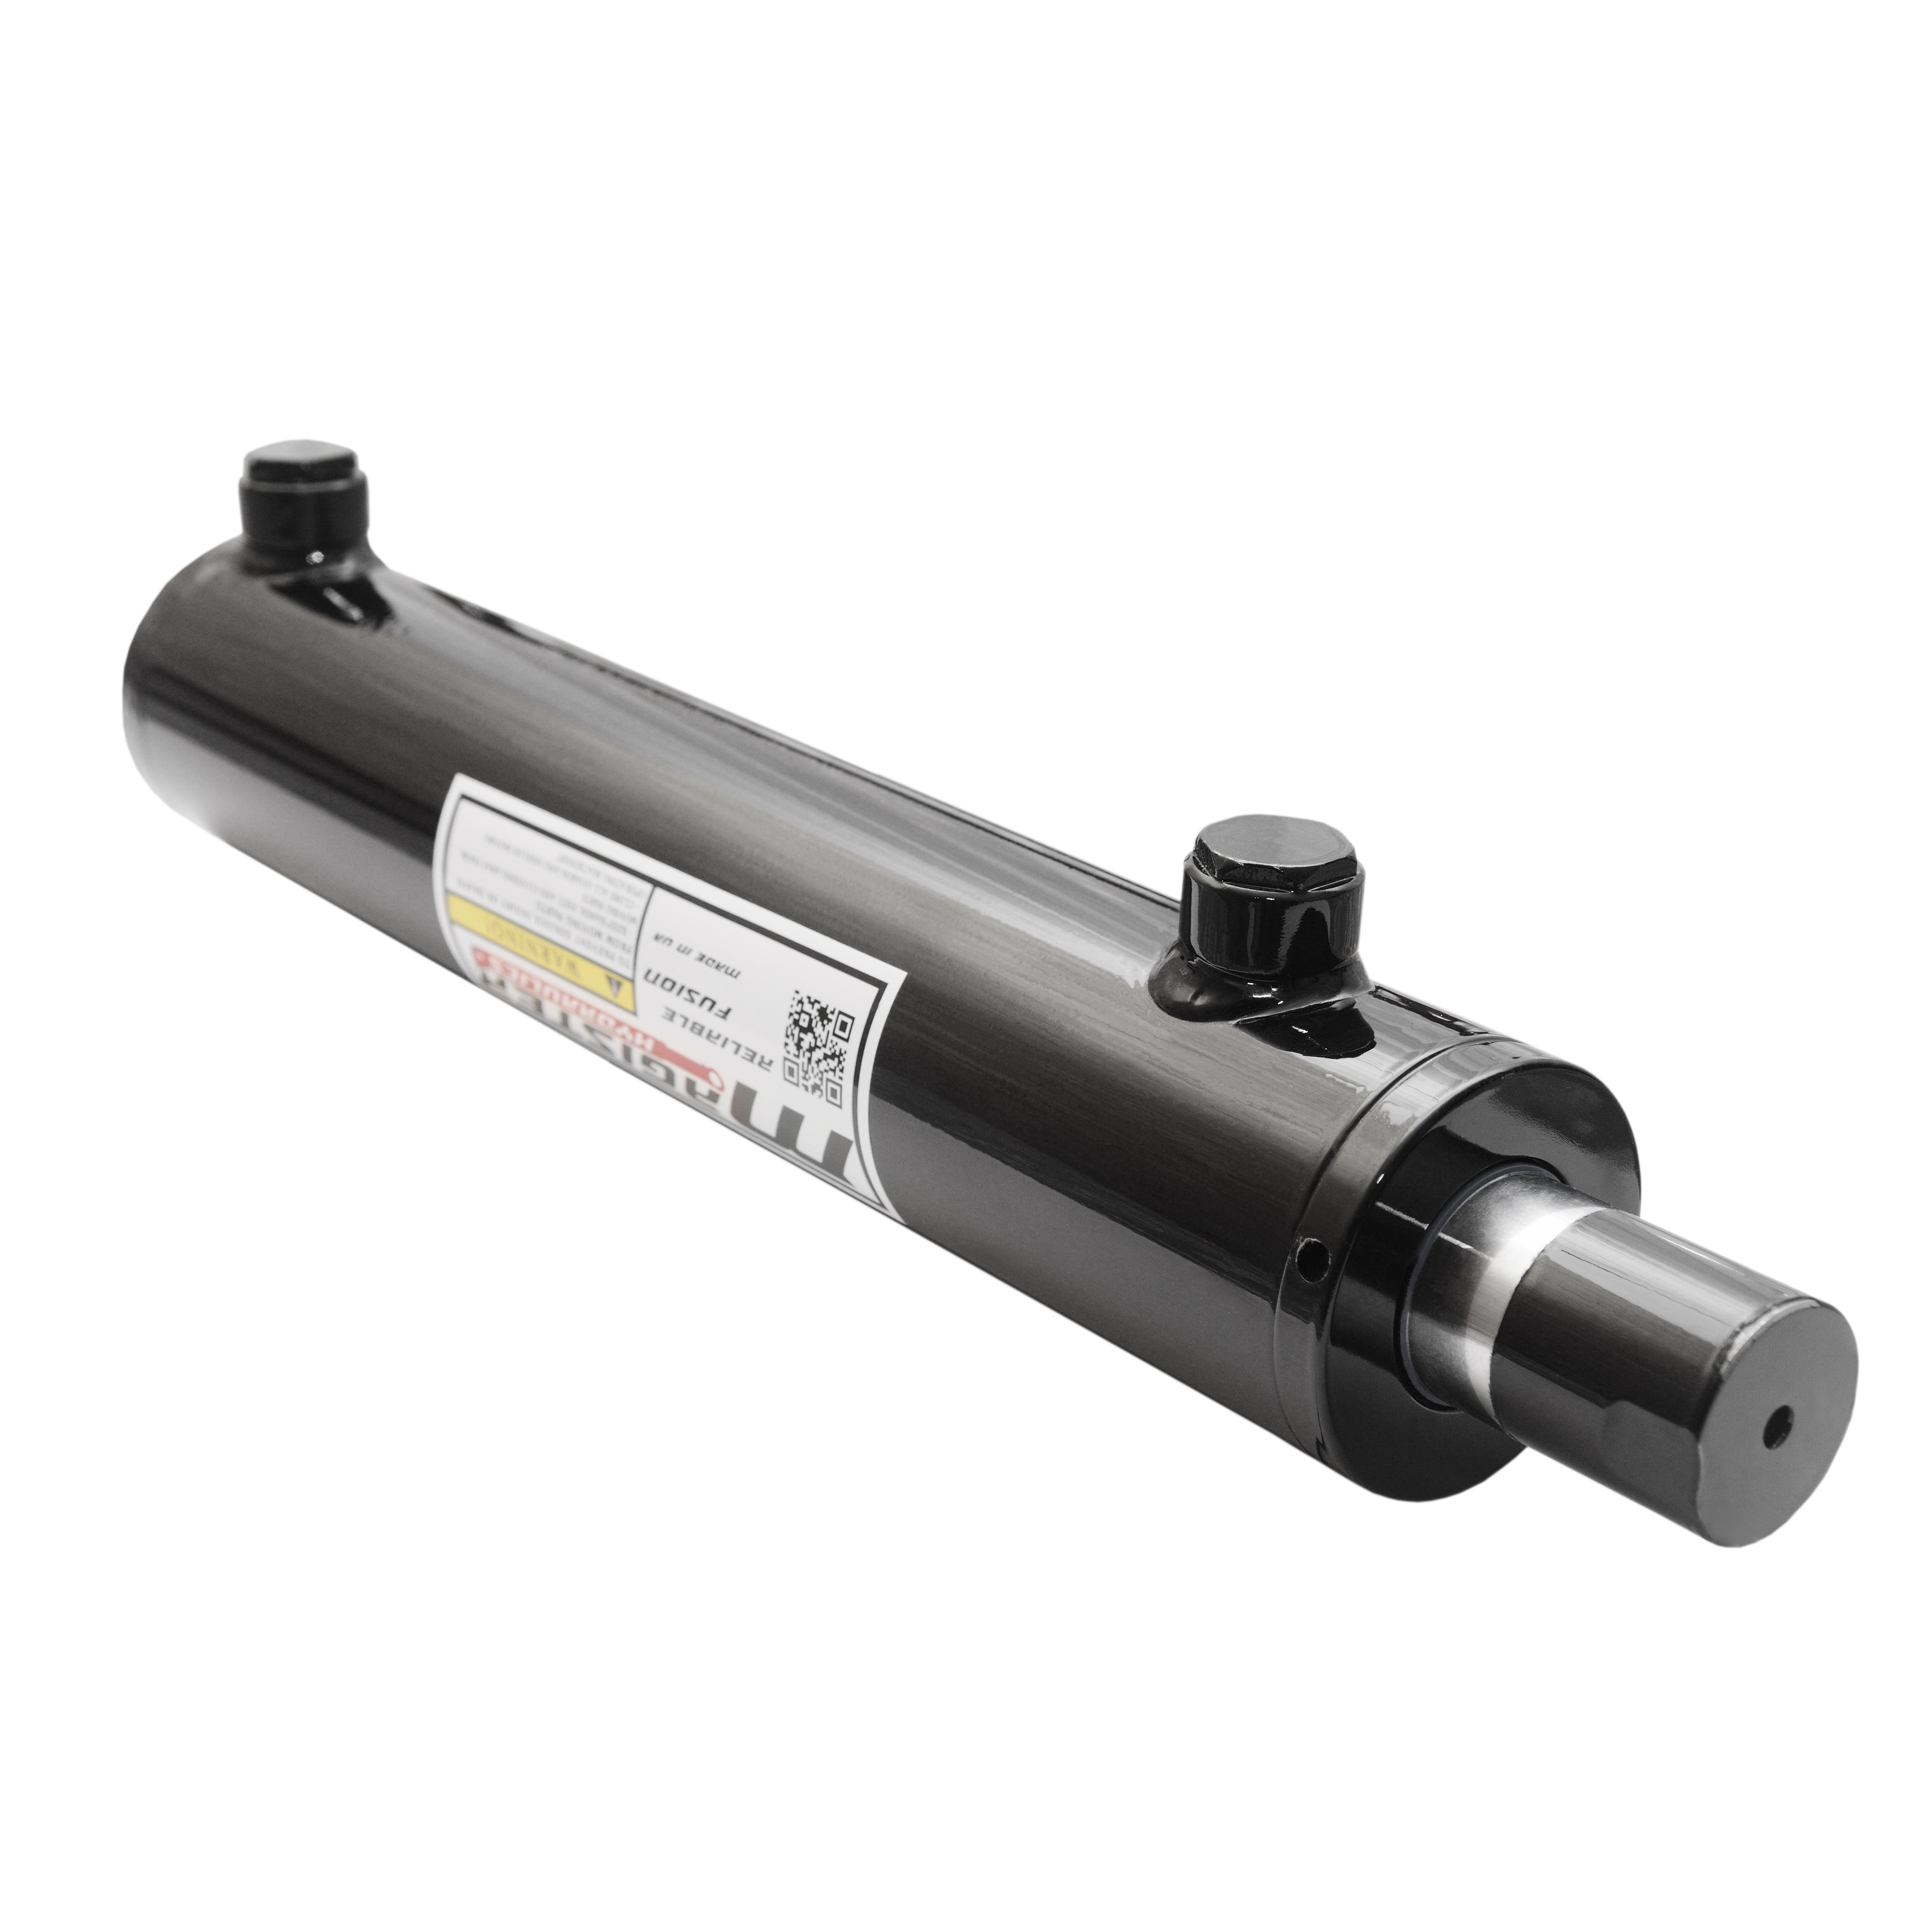 2 bore x 19 stroke hydraulic cylinder, welded universal double acting cylinder | Magister Hydraulics